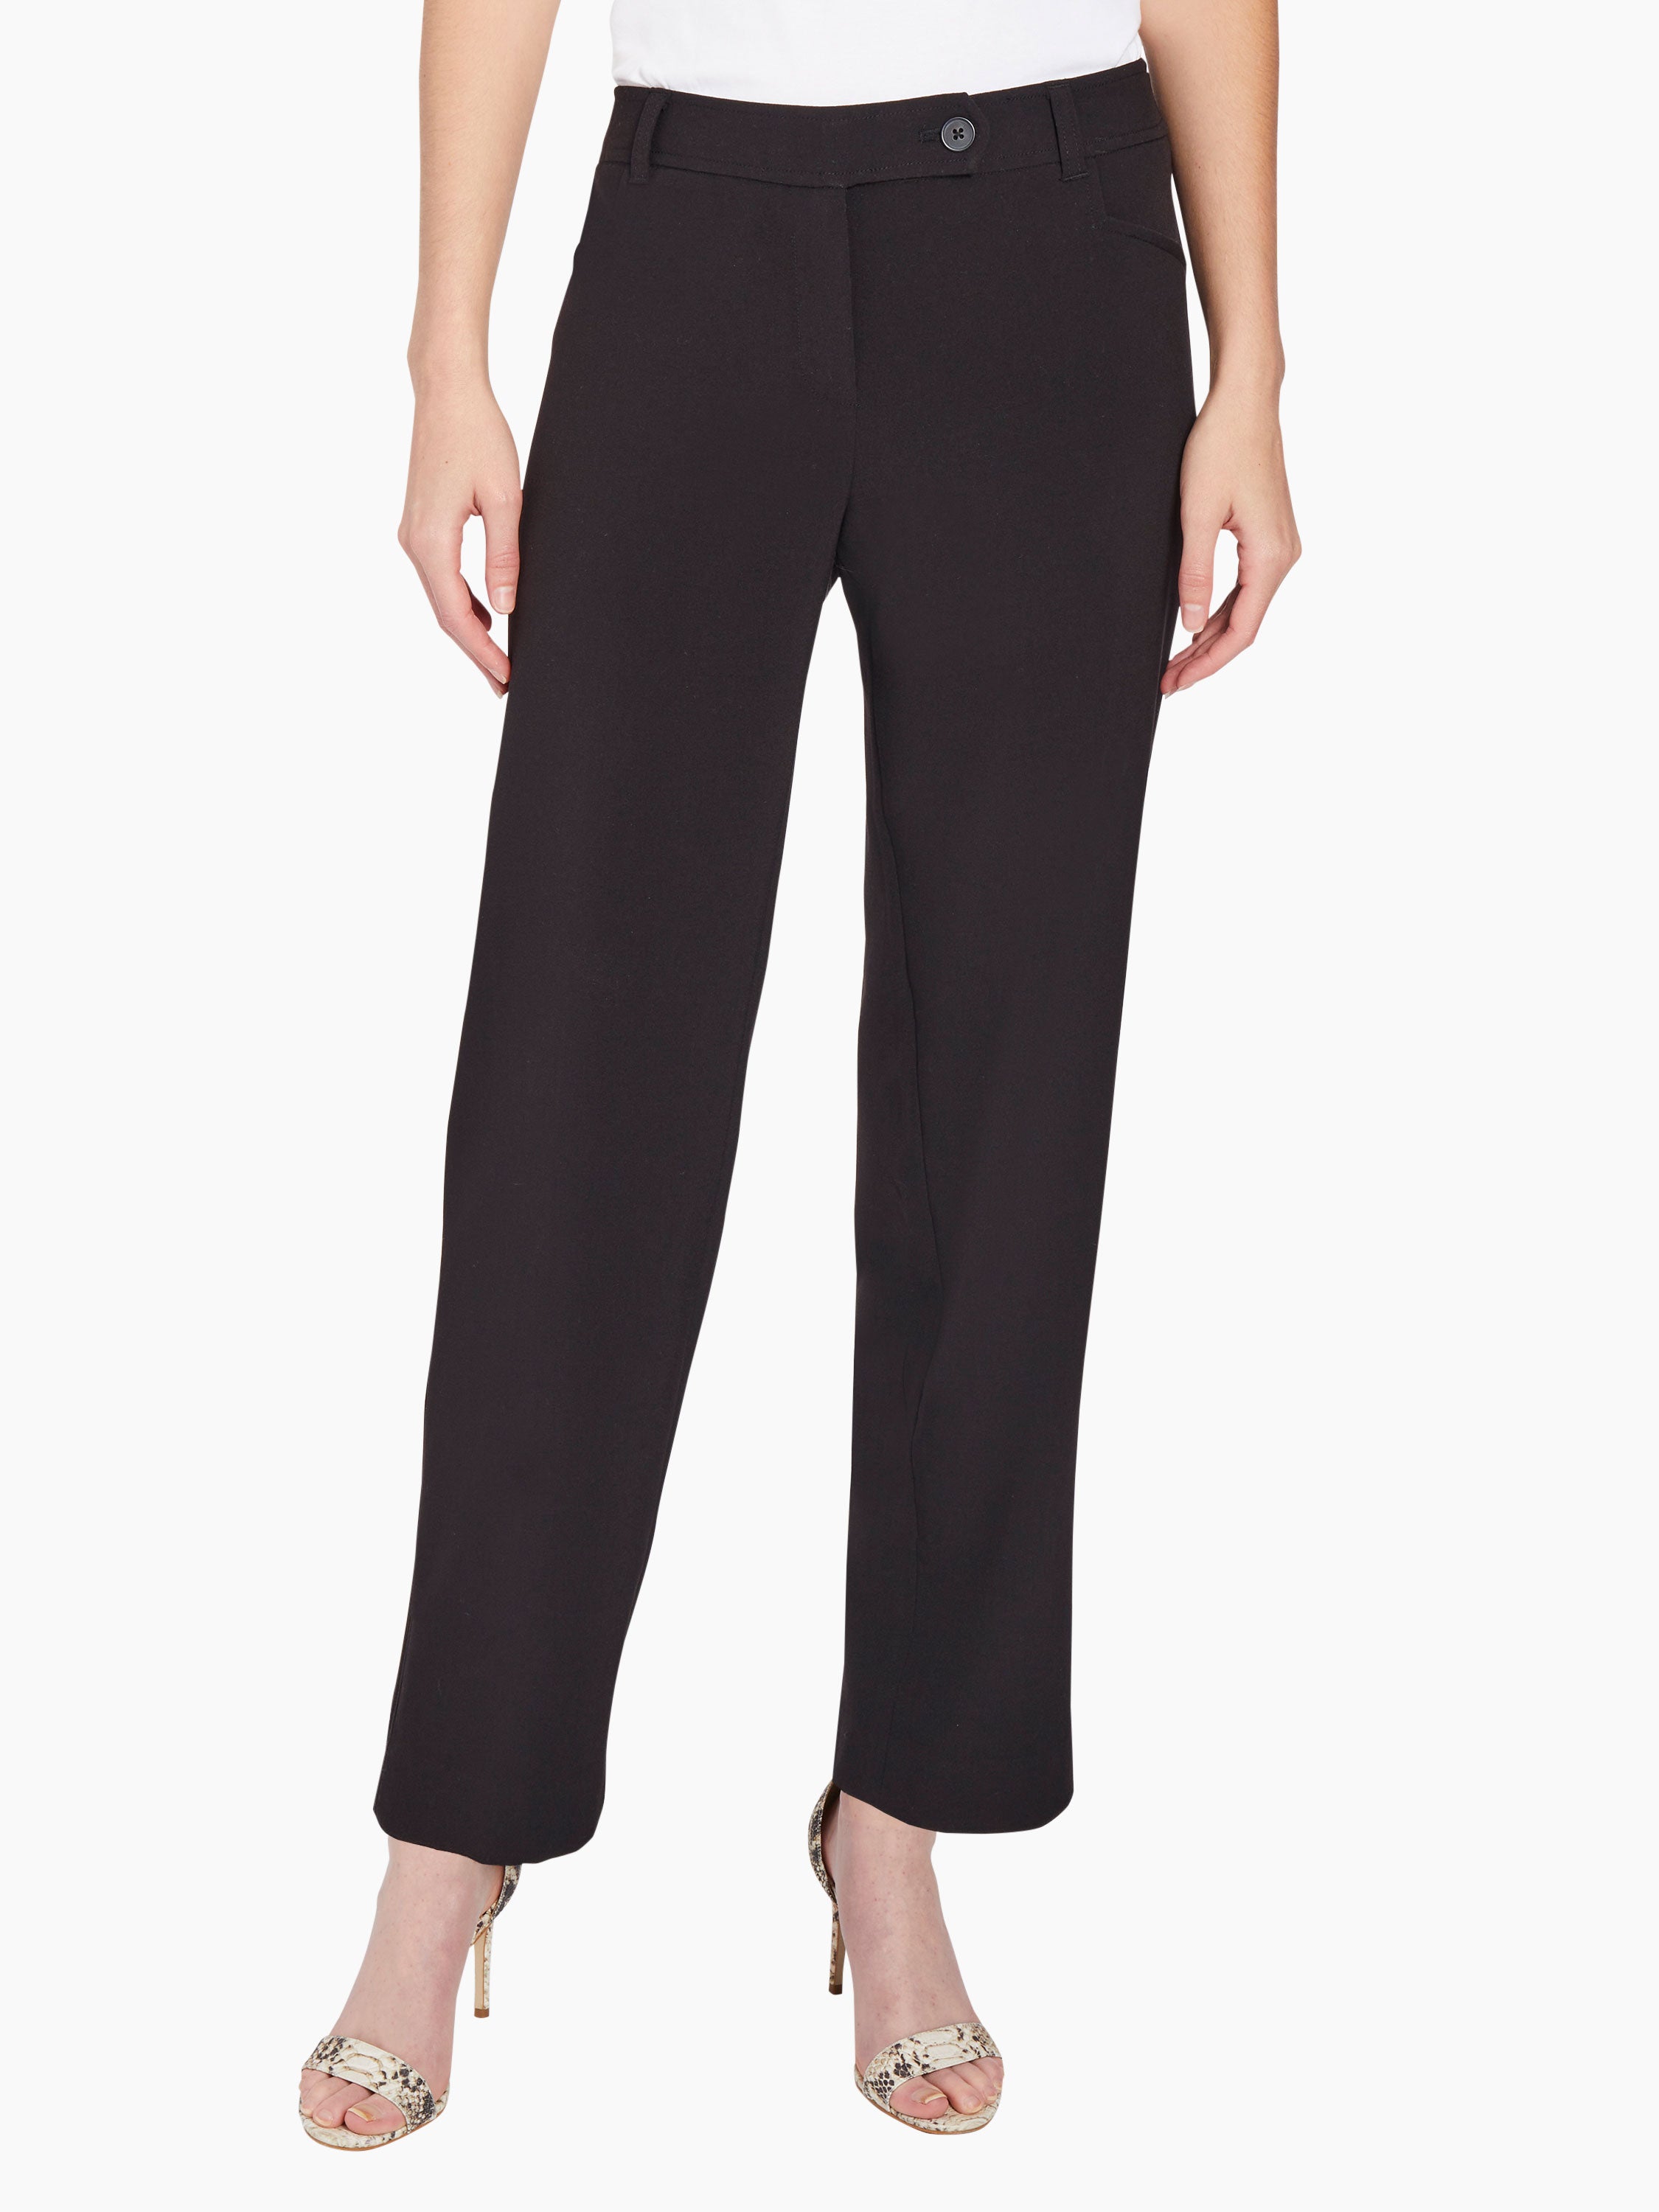 Athleta Solid Black Casual Pants Size 0 - 60% off